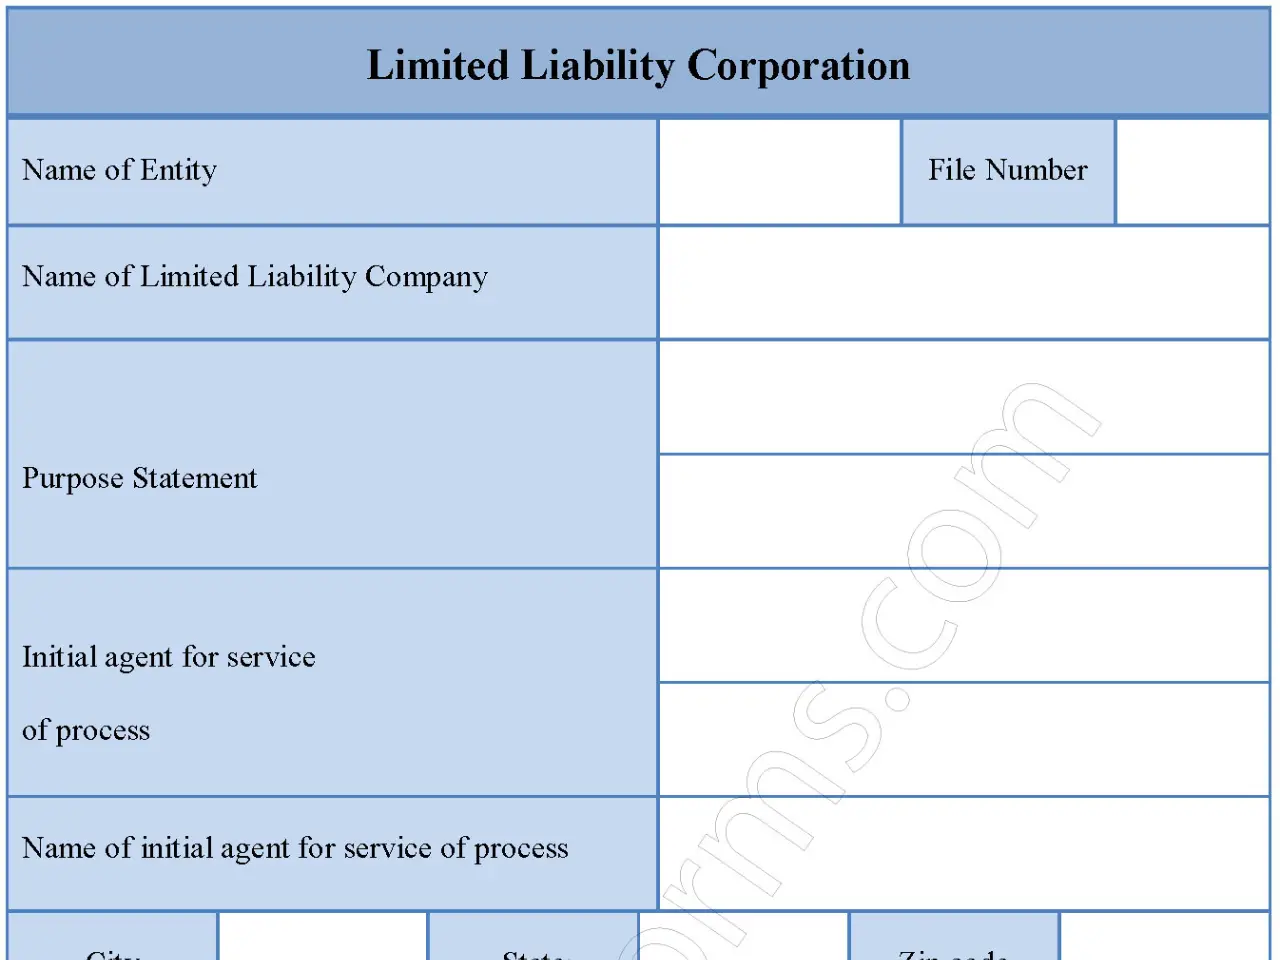 Limited Liability Corporation Form